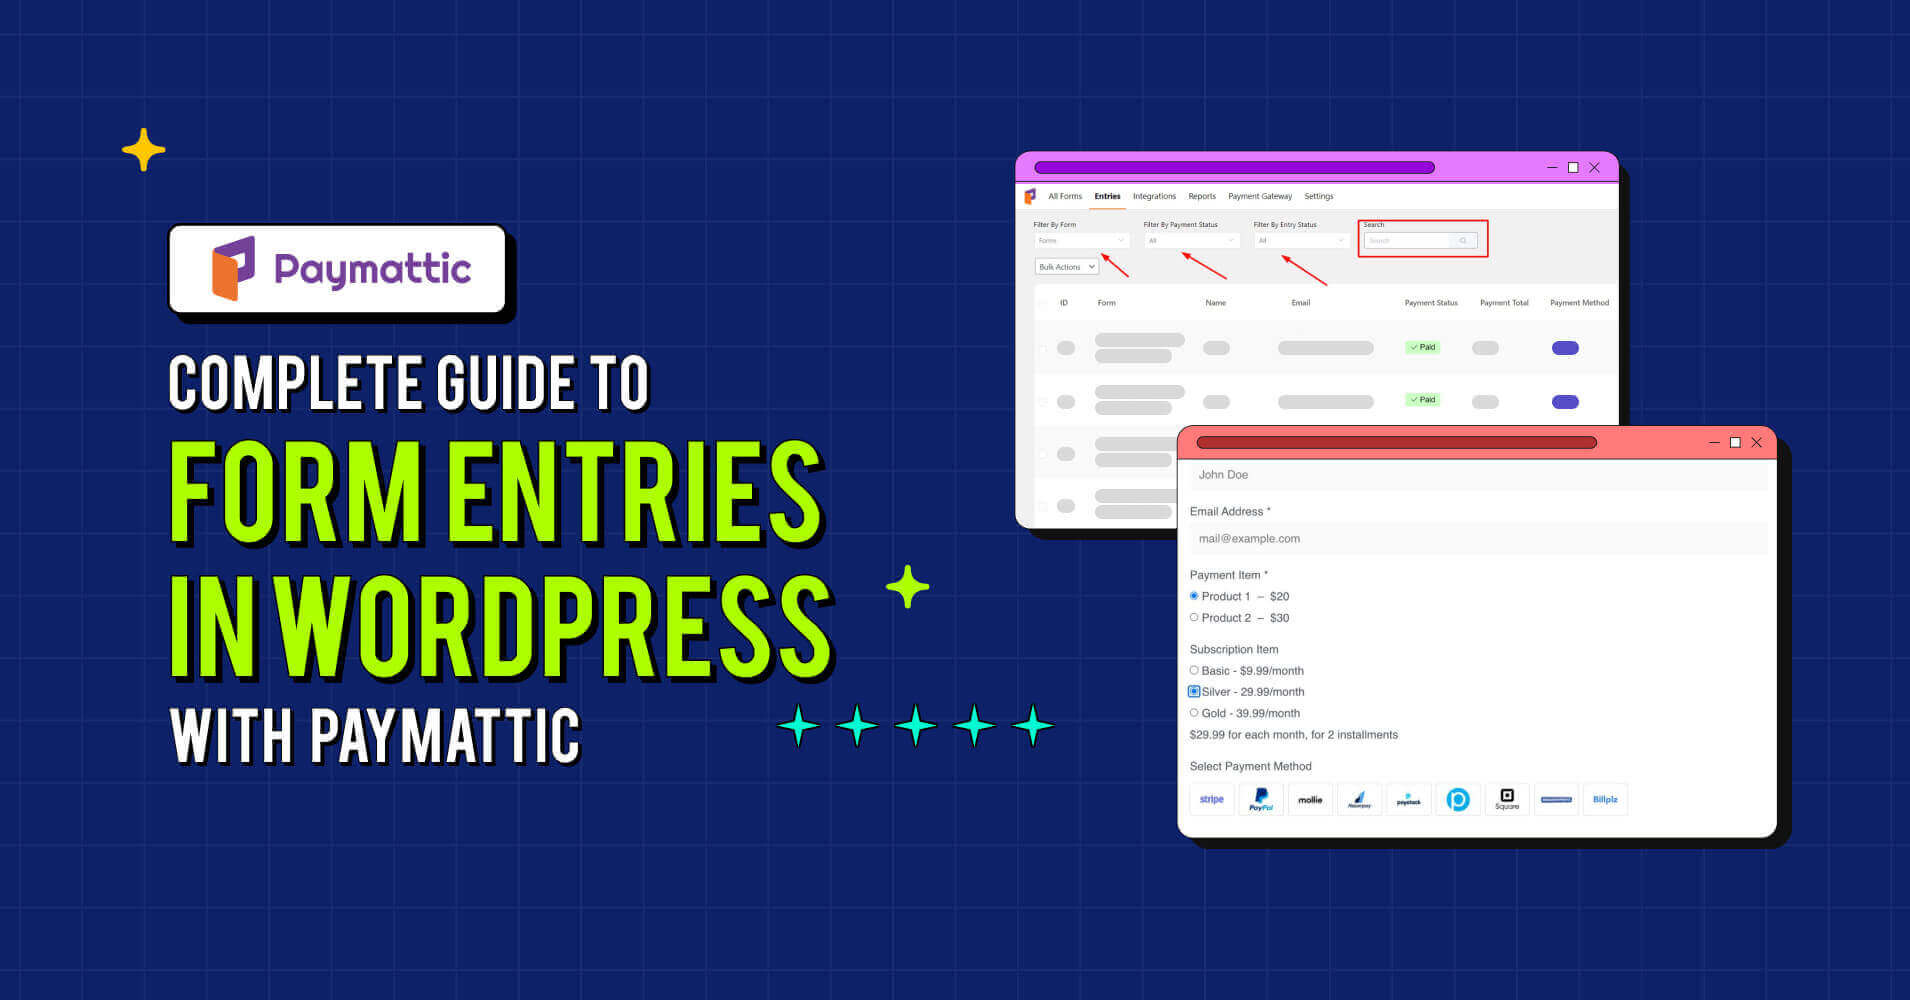 A Complete Guide to Form Entries in WordPress with Paymattic